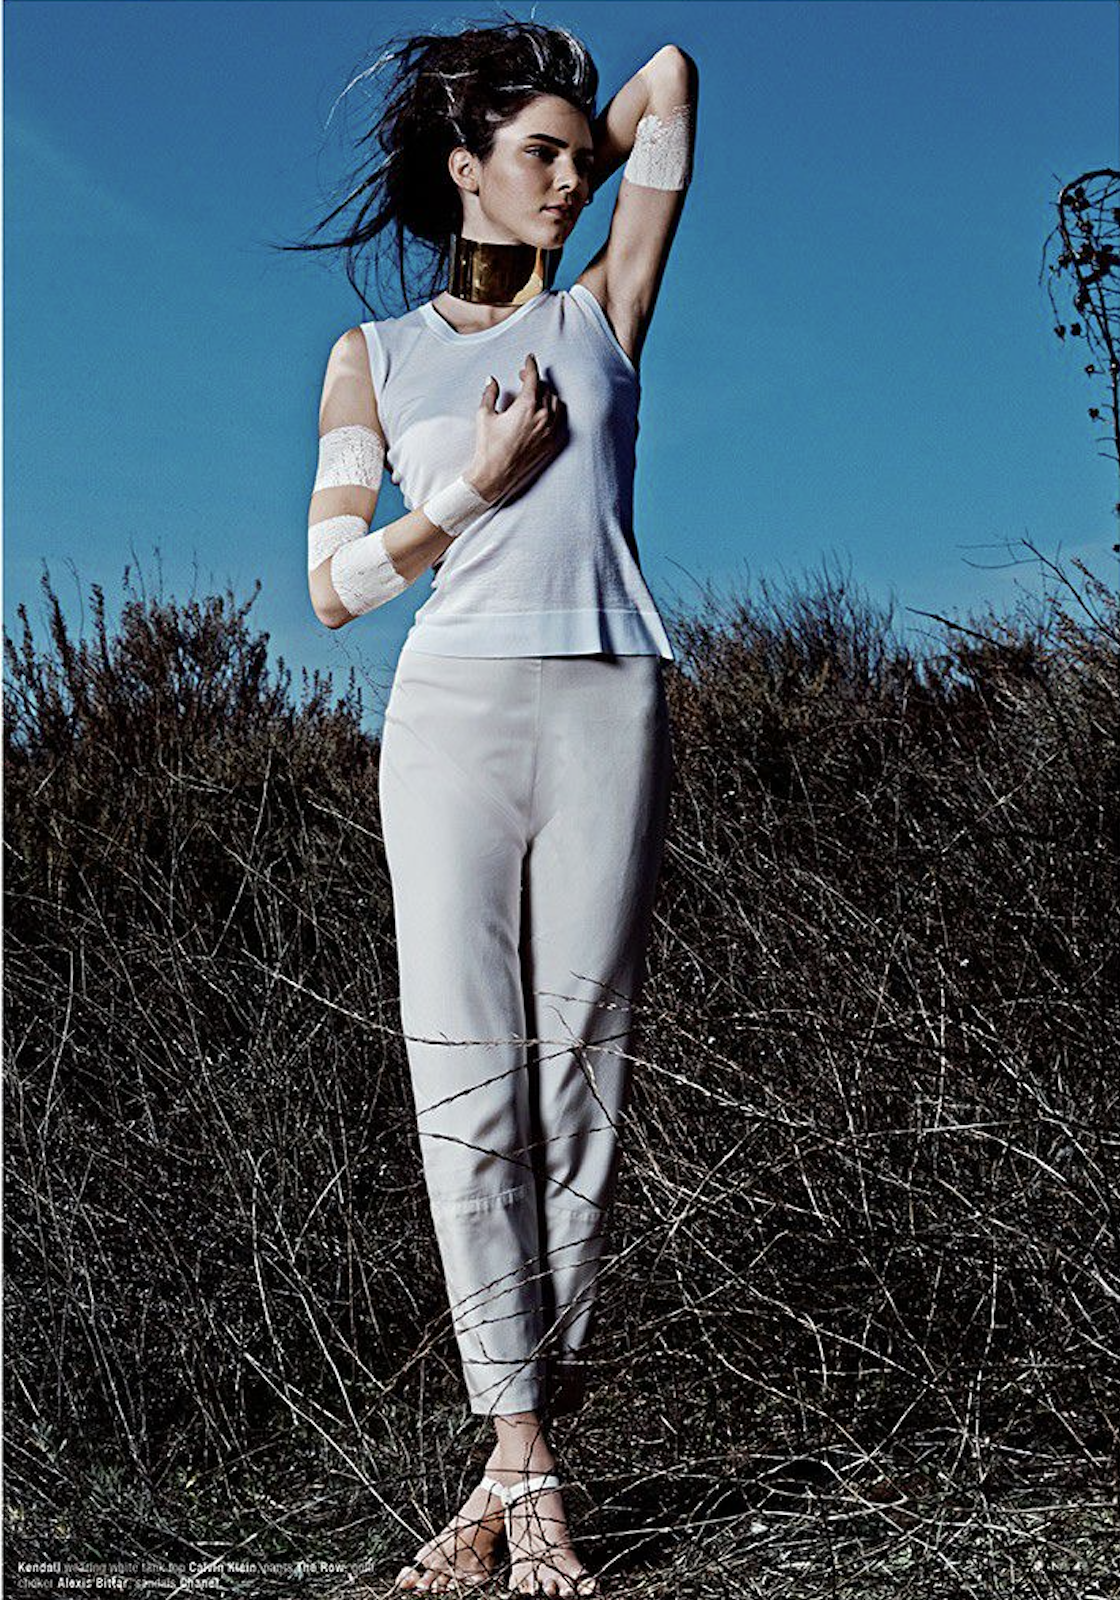 Kendall-Jenner-by-Russell-James-Kurv-Magazine-May-2013-6.png